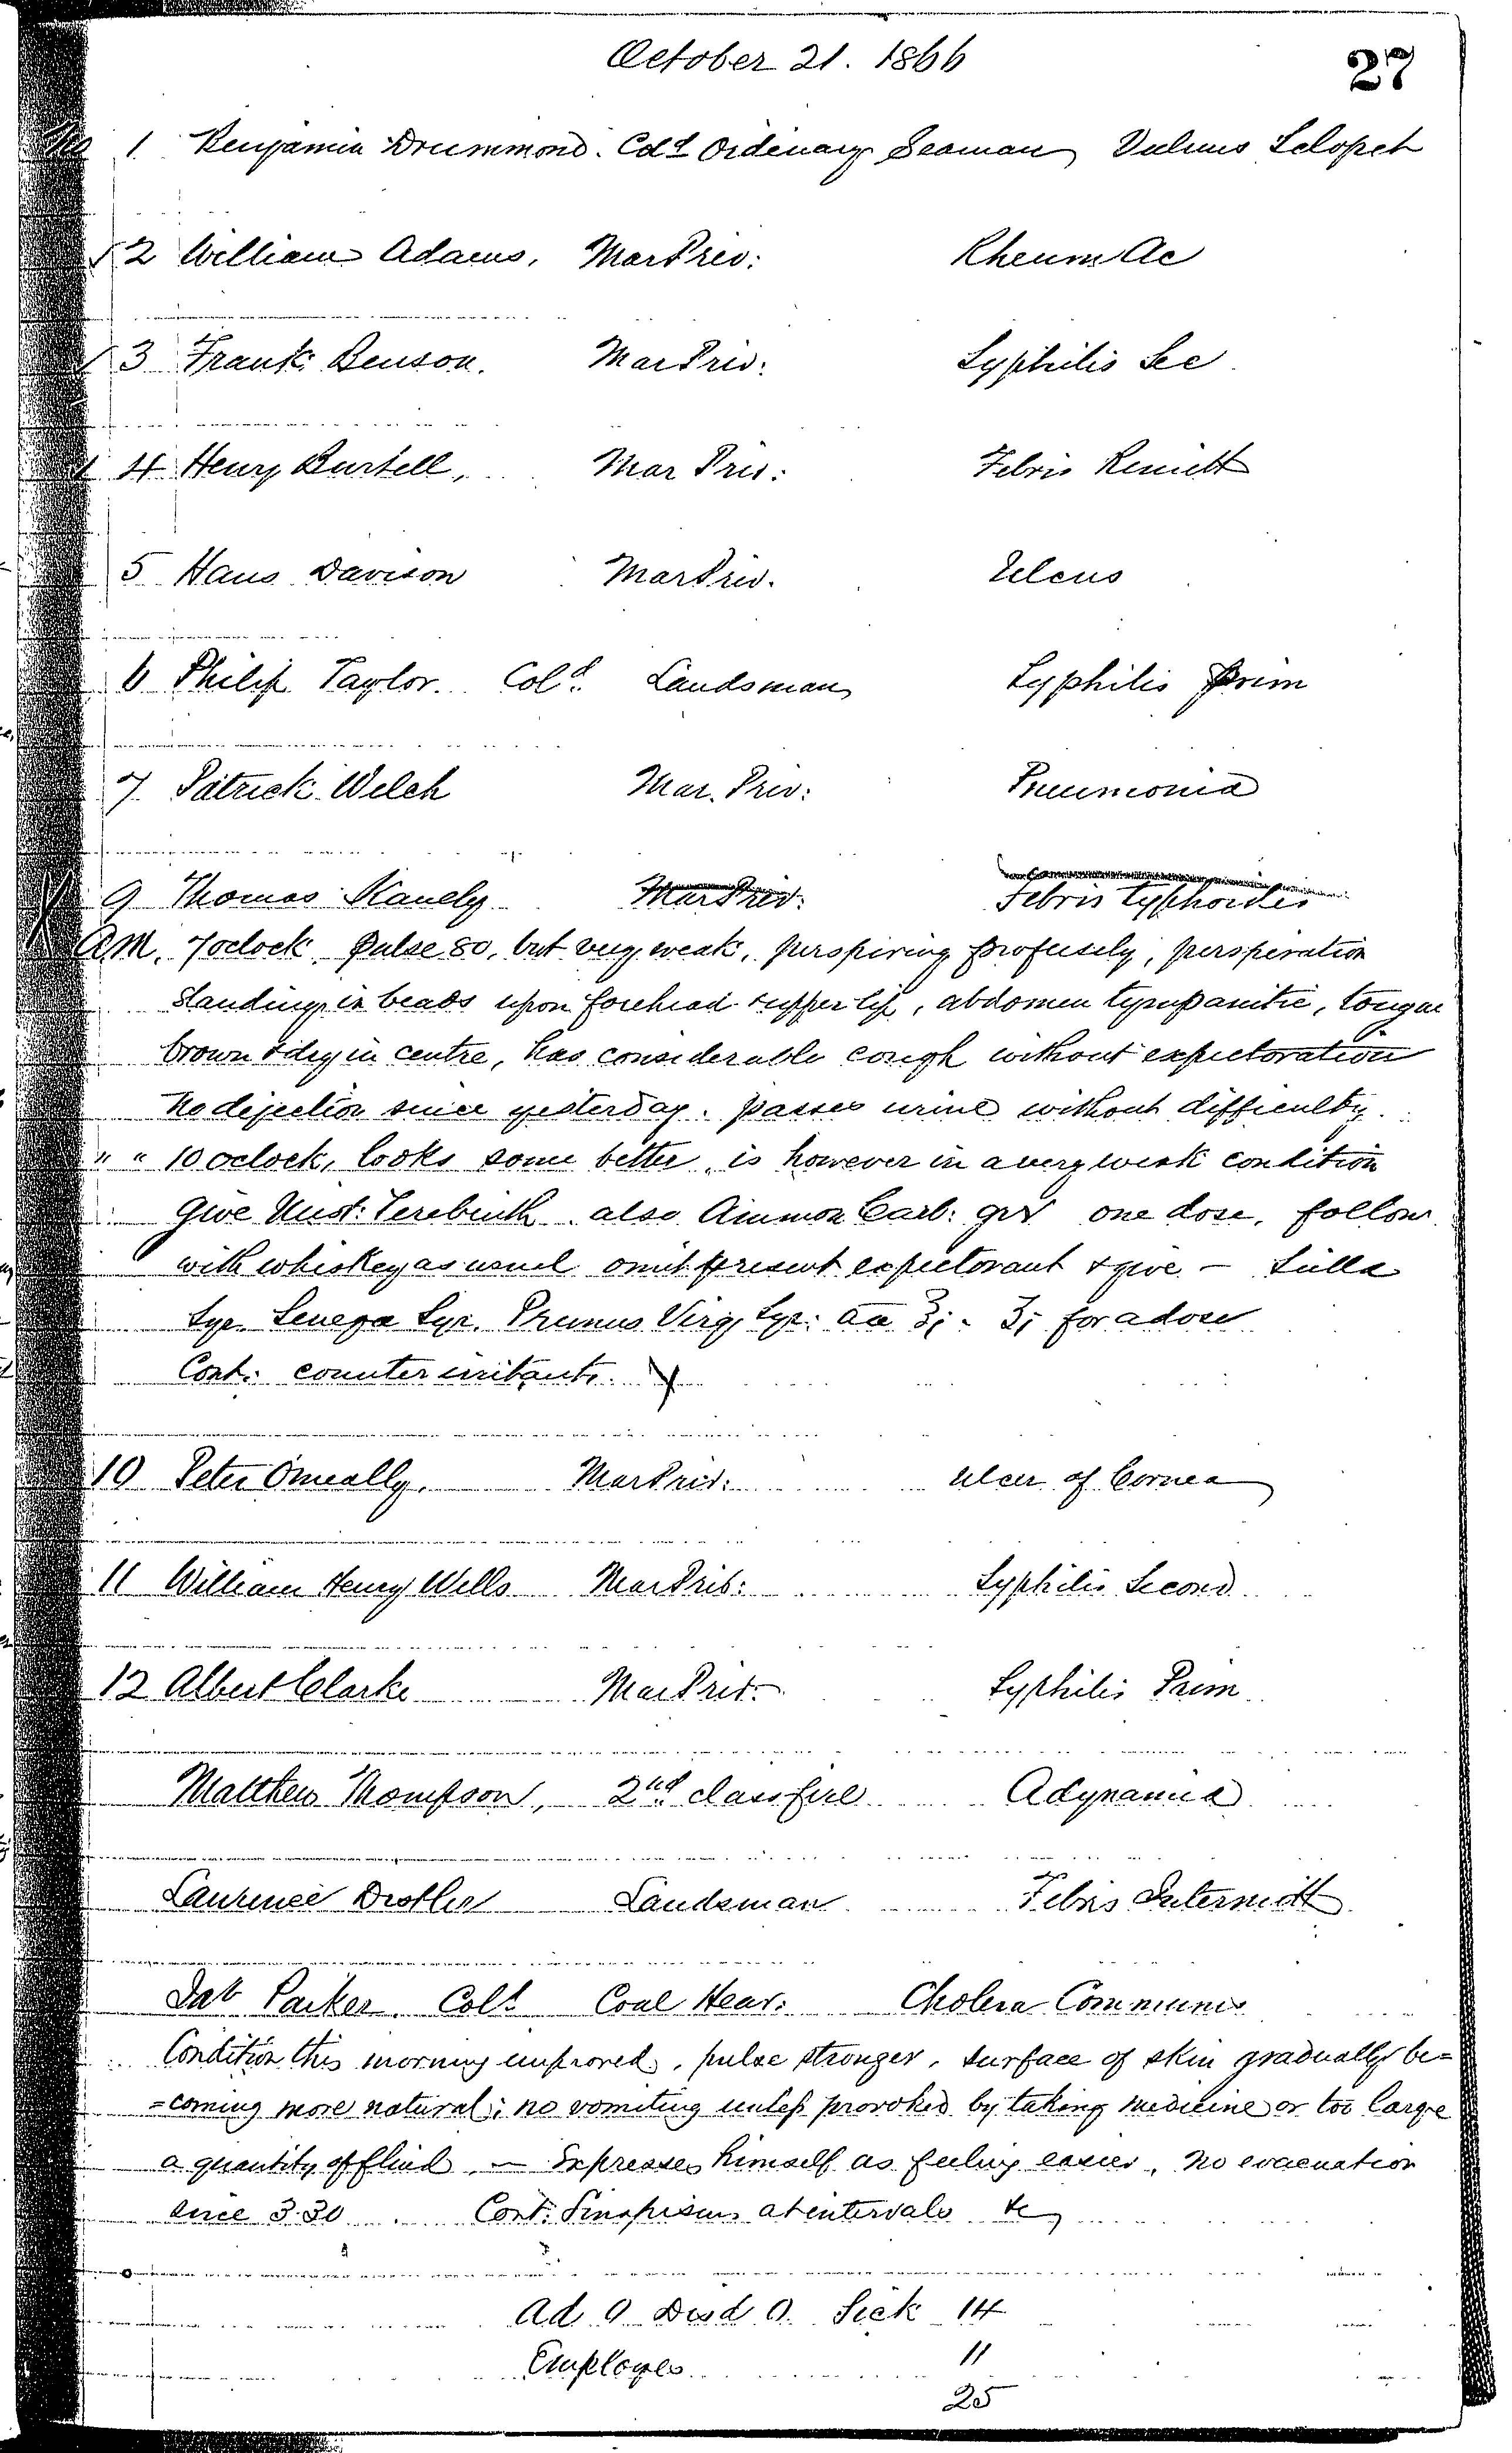 Patients in the Naval Hospital, Washington DC, on October 21, 1866, page 1 of 1, in the Medical Journal, October 1, 1866 to March 20, 1867